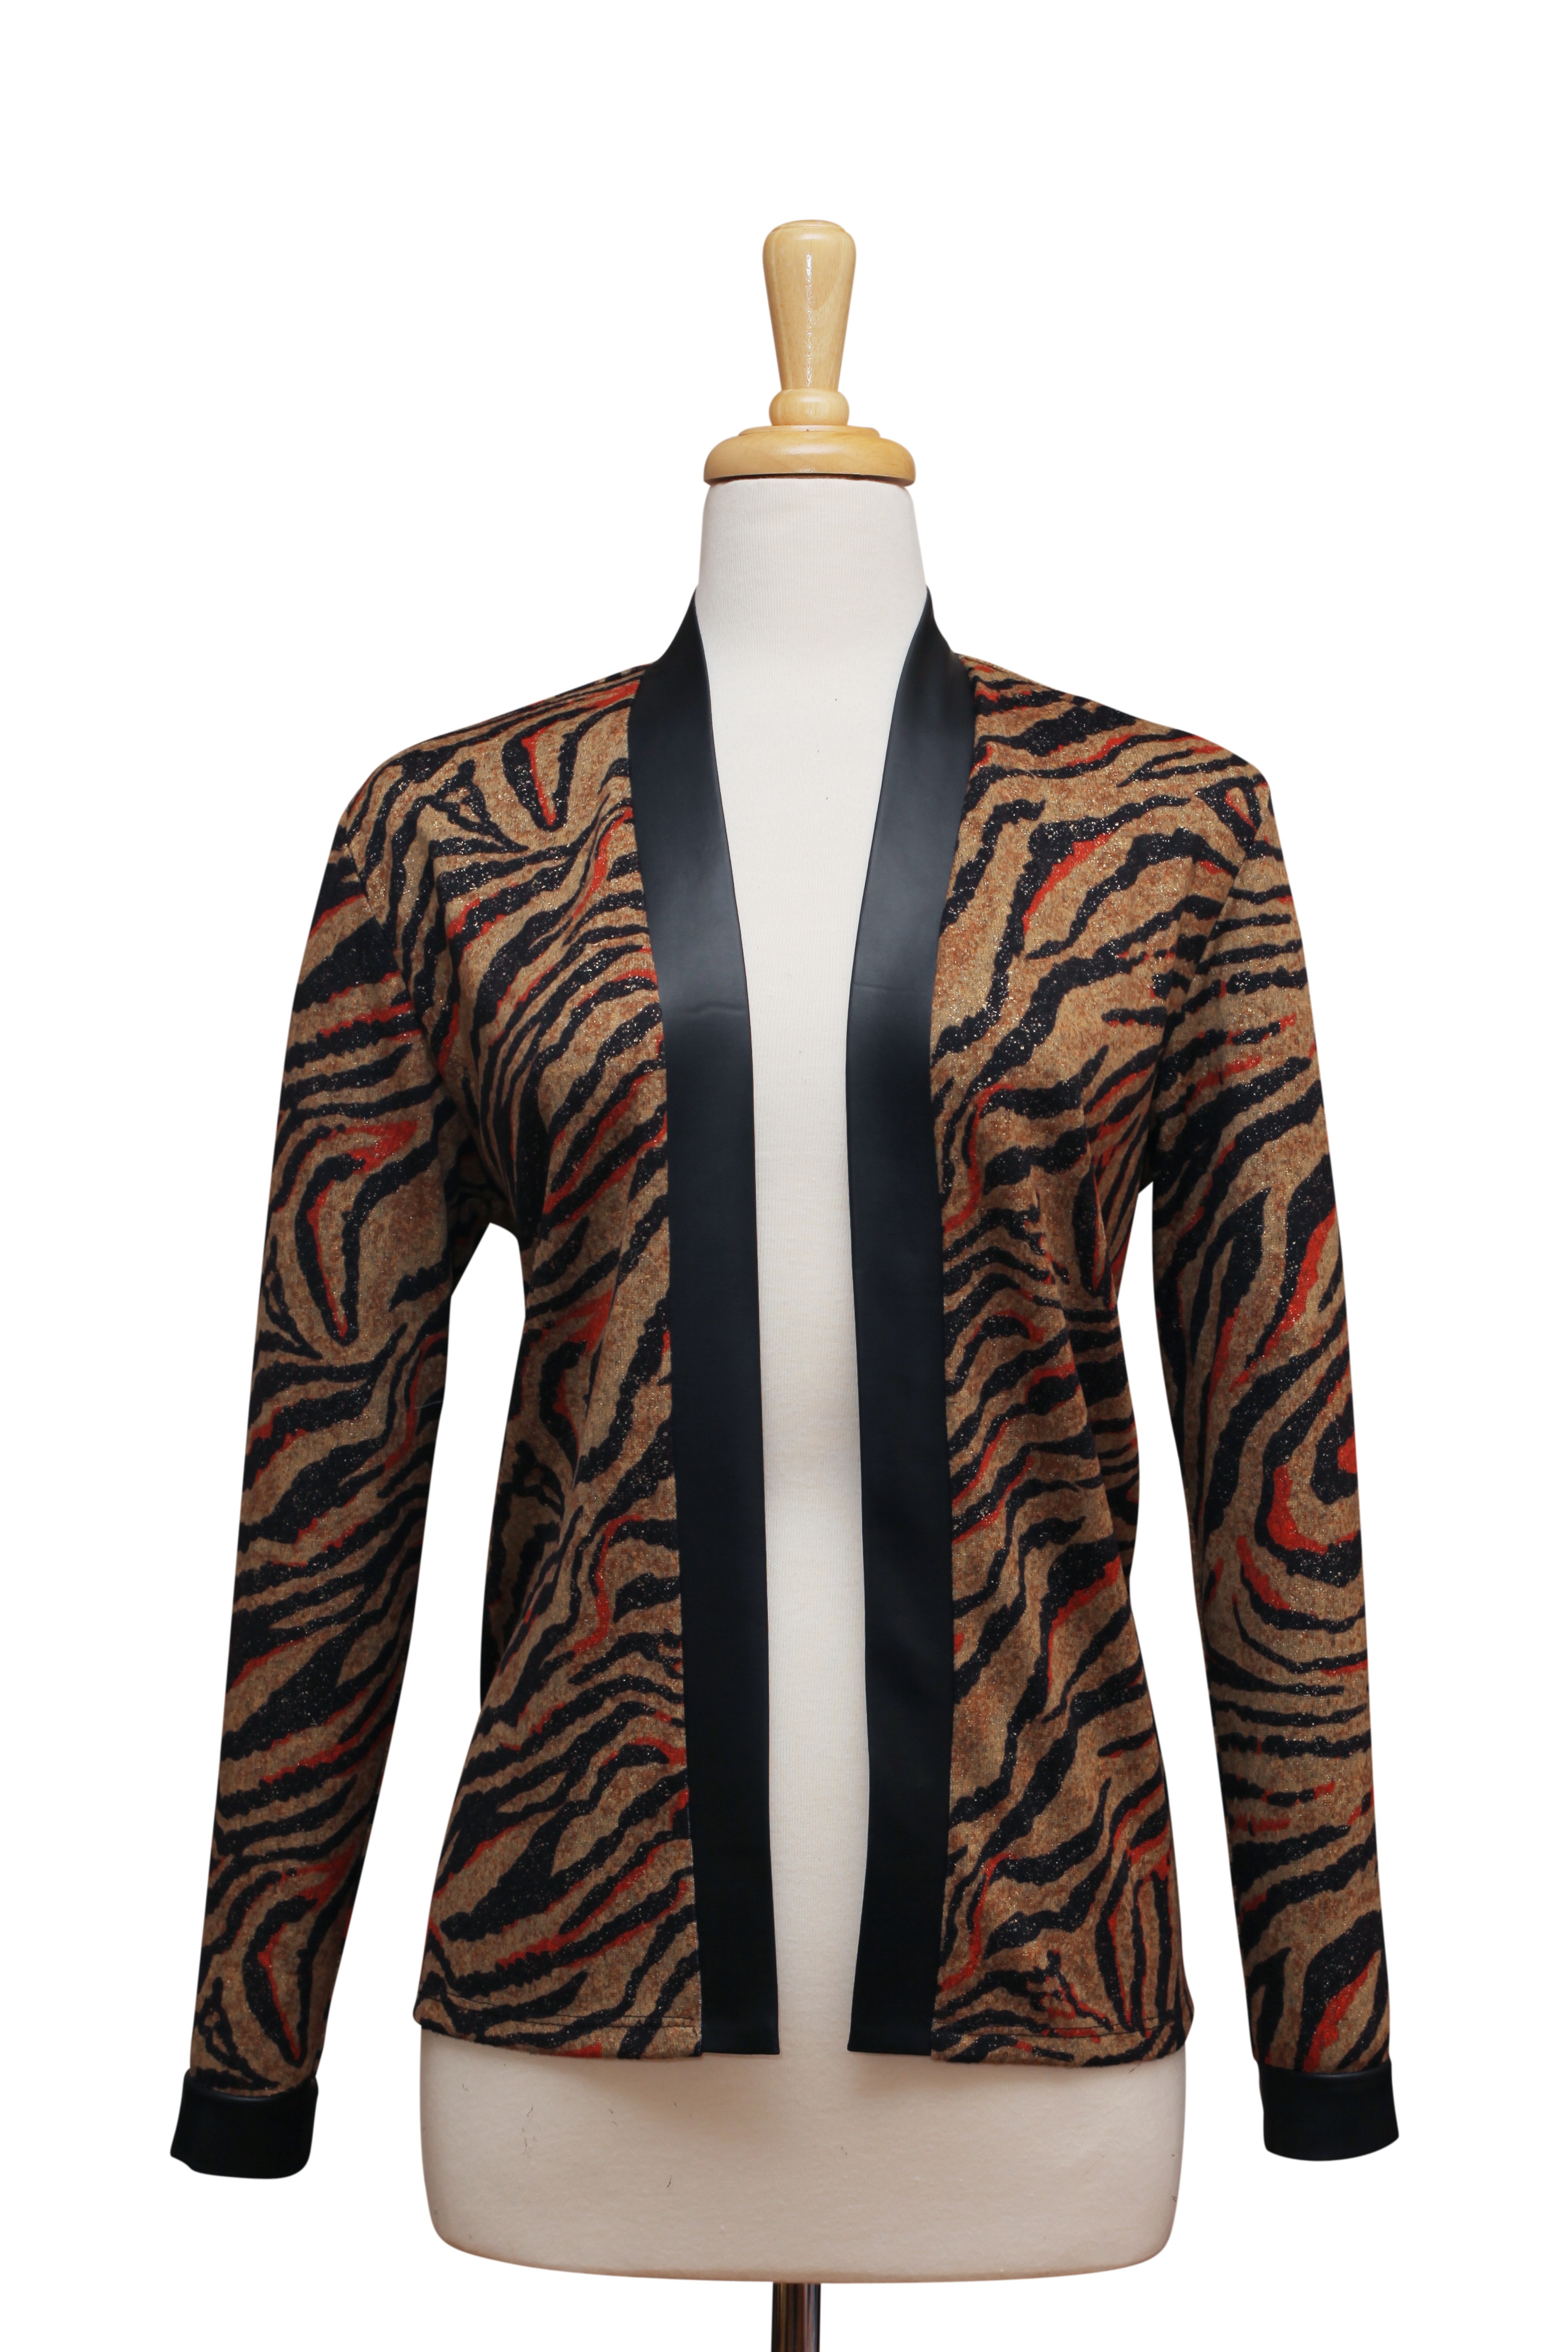  Black and Camel Animal Print Knit Jacket With Leather Trim